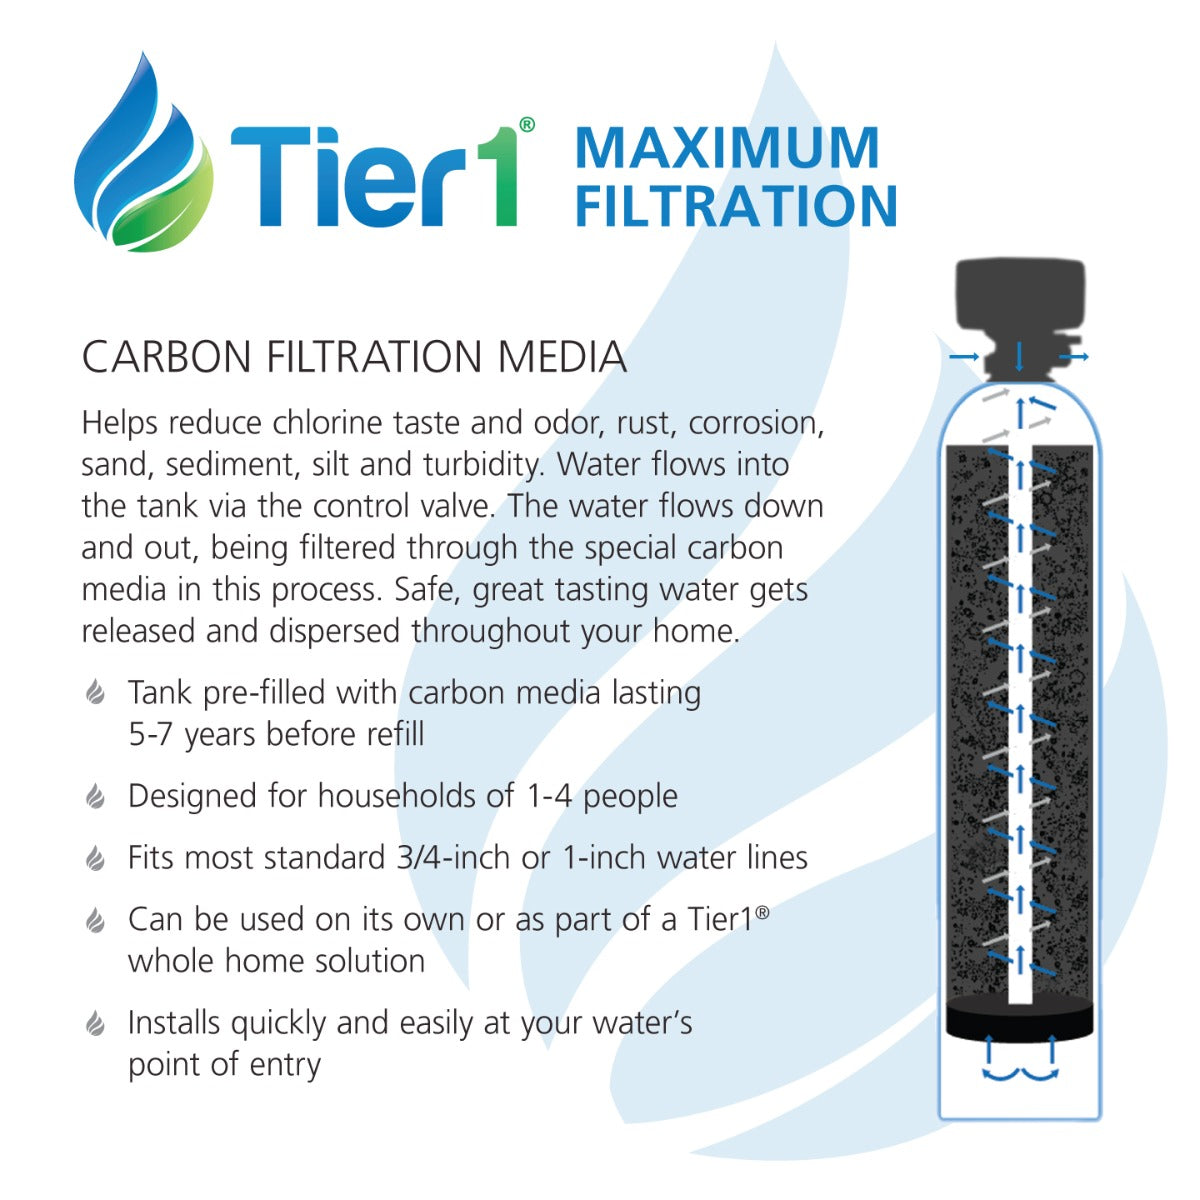 Precision Series Tier1 Whole House Water Filtration System for Chlorine, Taste & Odor Reduction for 4 - 6 Bathrooms